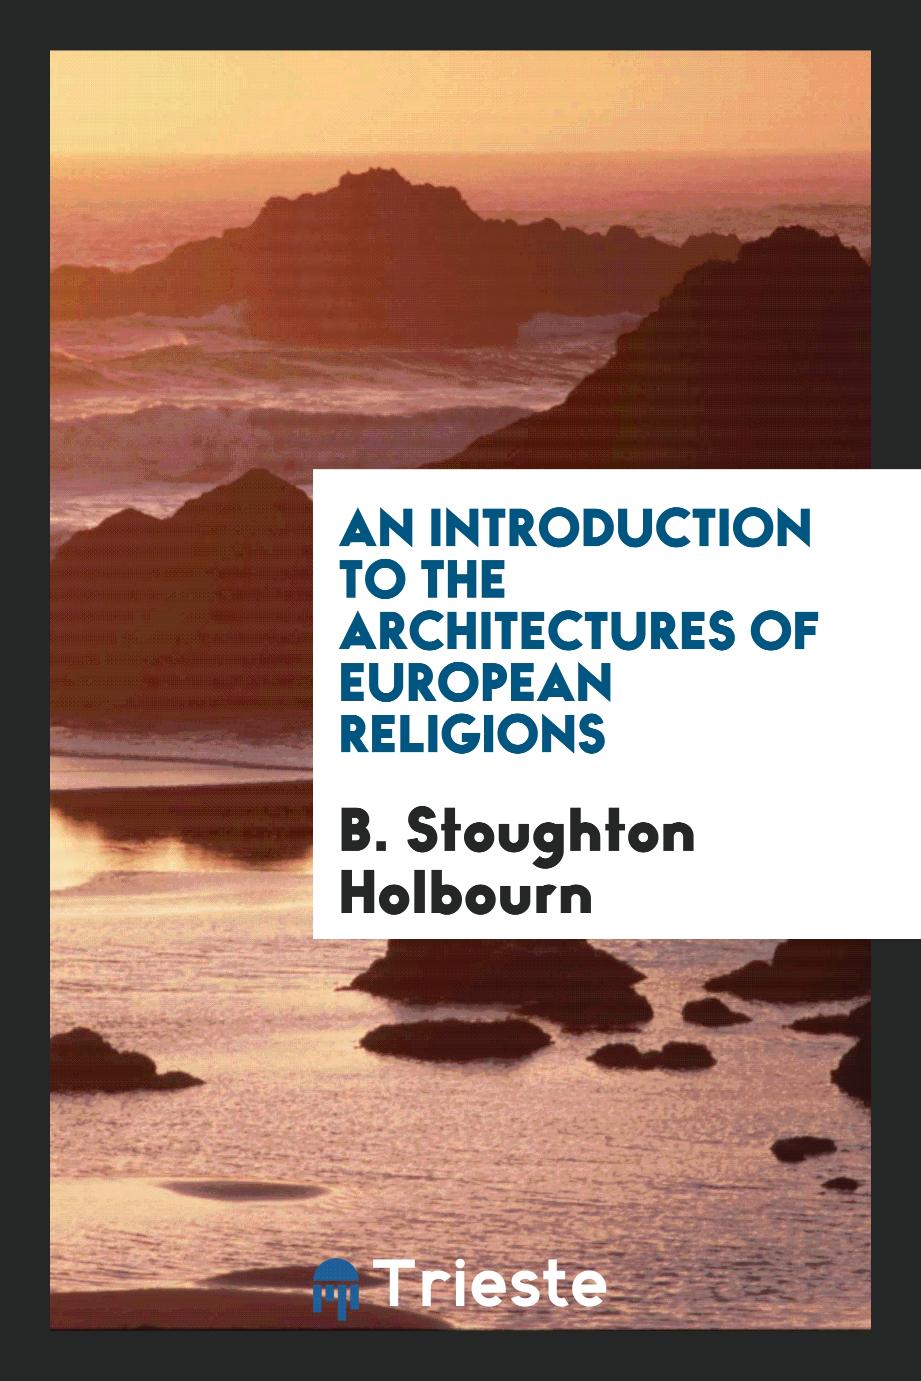 An introduction to the architectures of European religions